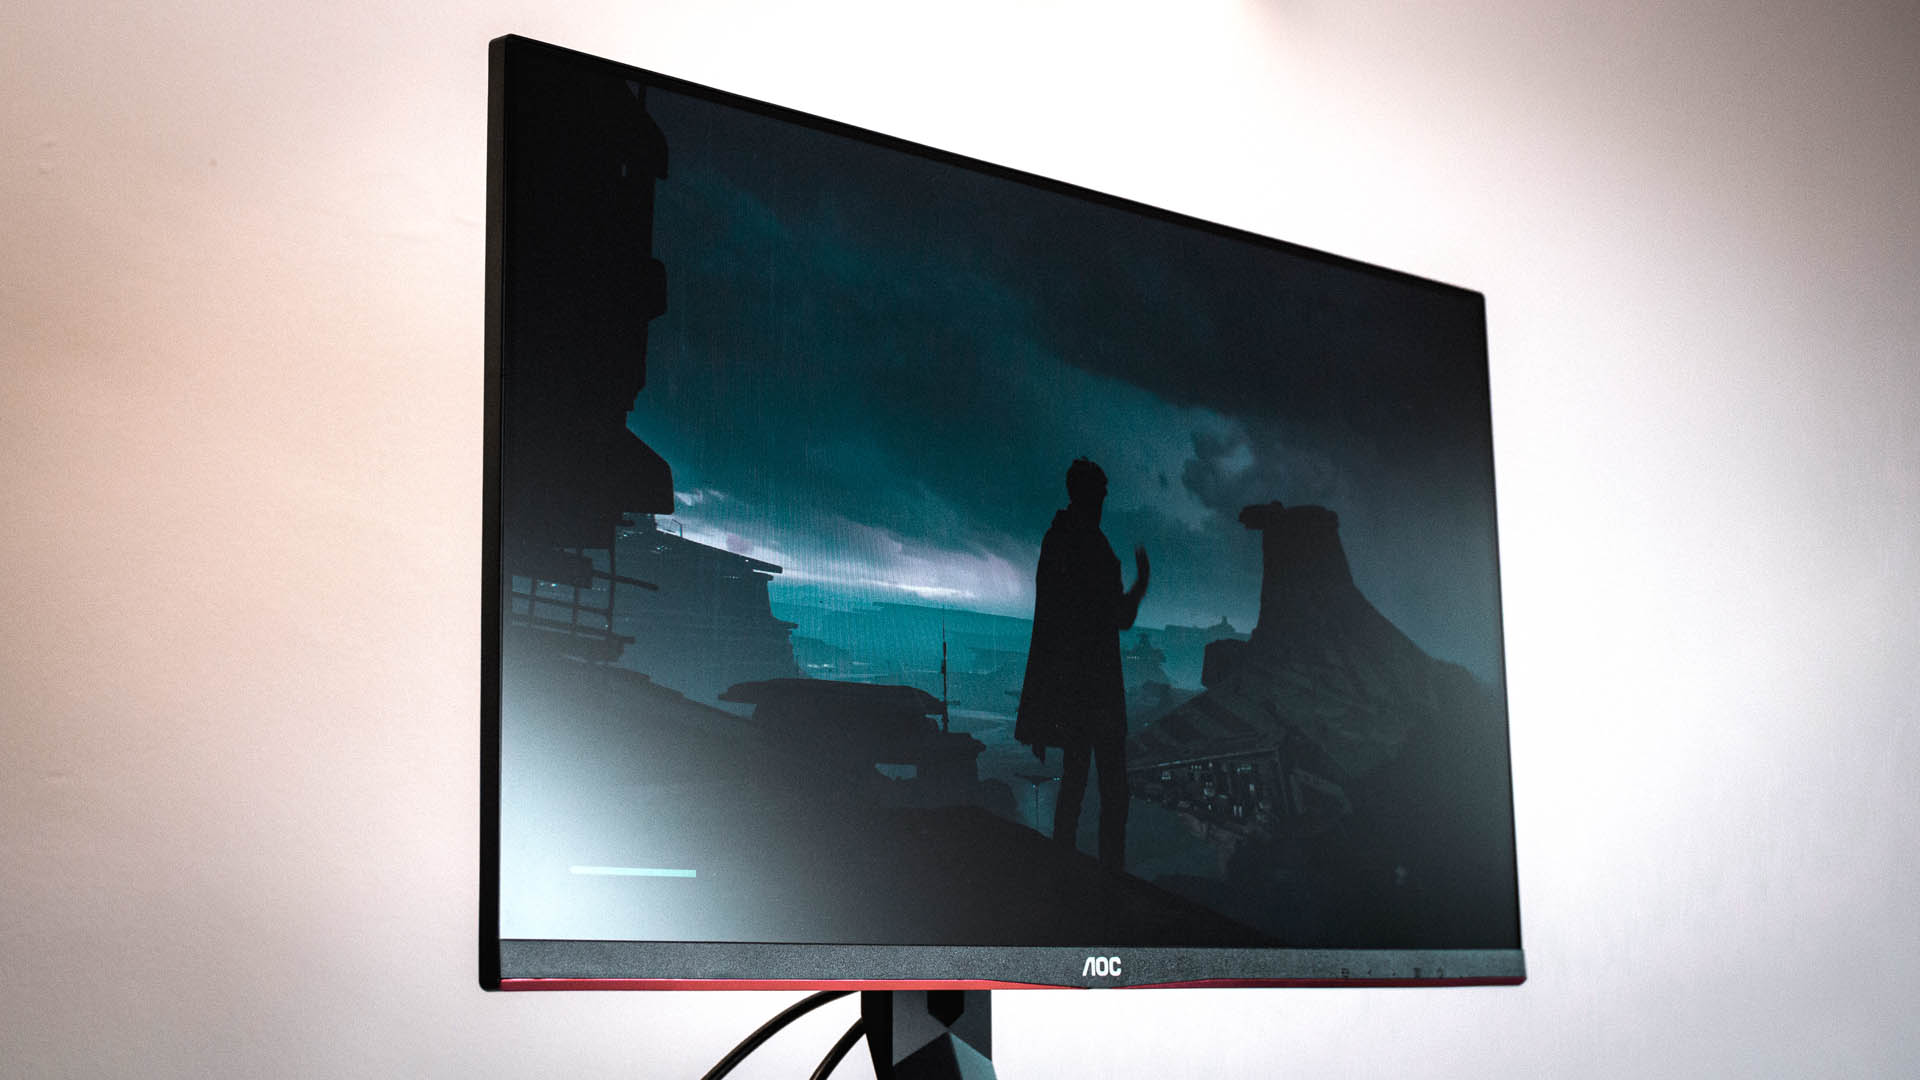 Aoc 27g2 27 Gaming Monitor Review Affordable And Fast Ips Pcgamesn